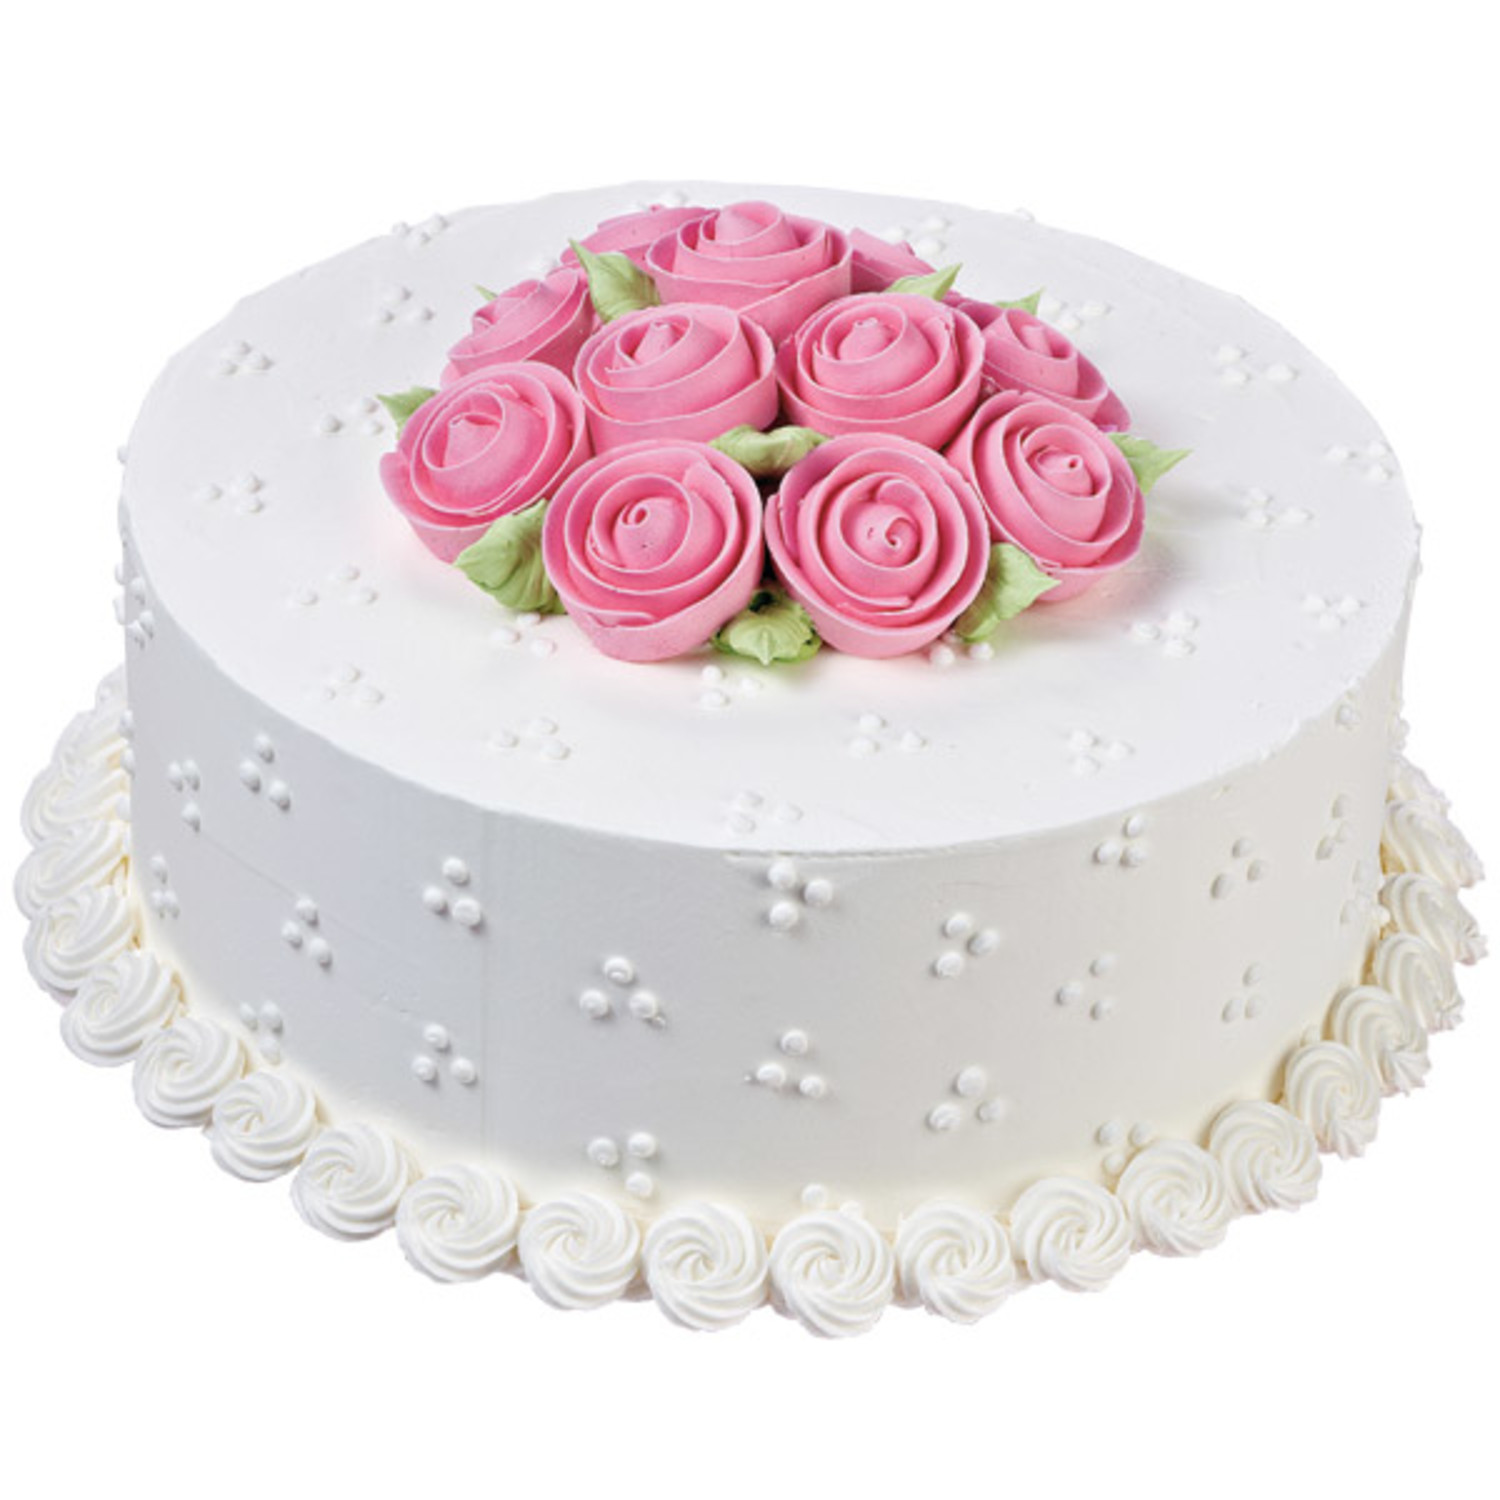 Send Happy rose day my love cake online by GiftJaipur in Rajasthan